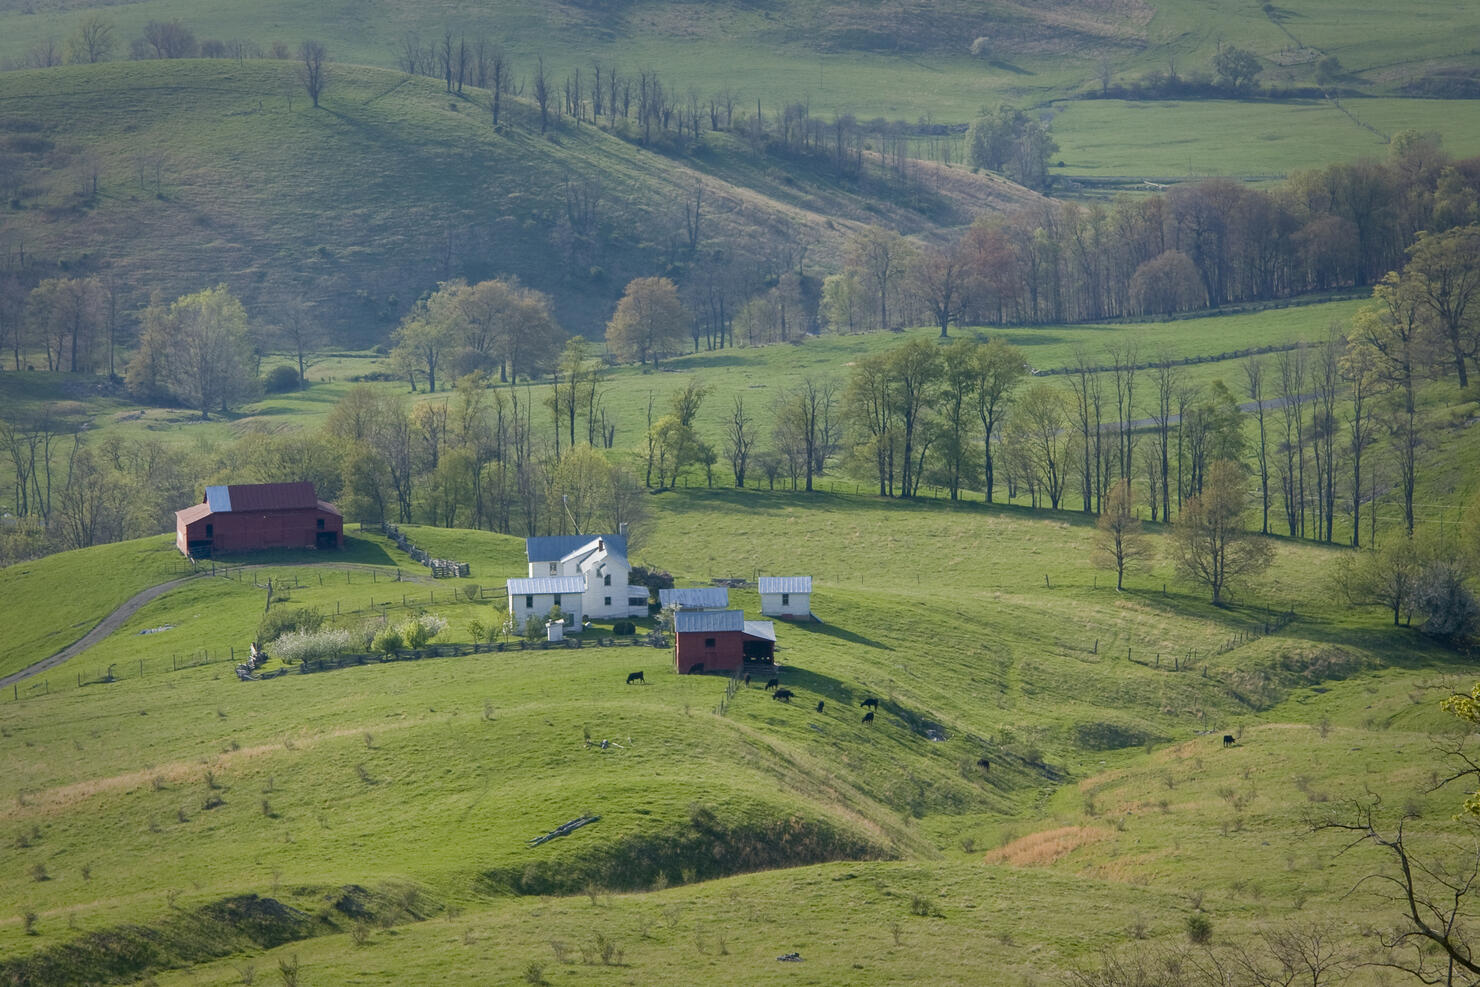 Hilltop farm and  cattle in the Virginia countryside.